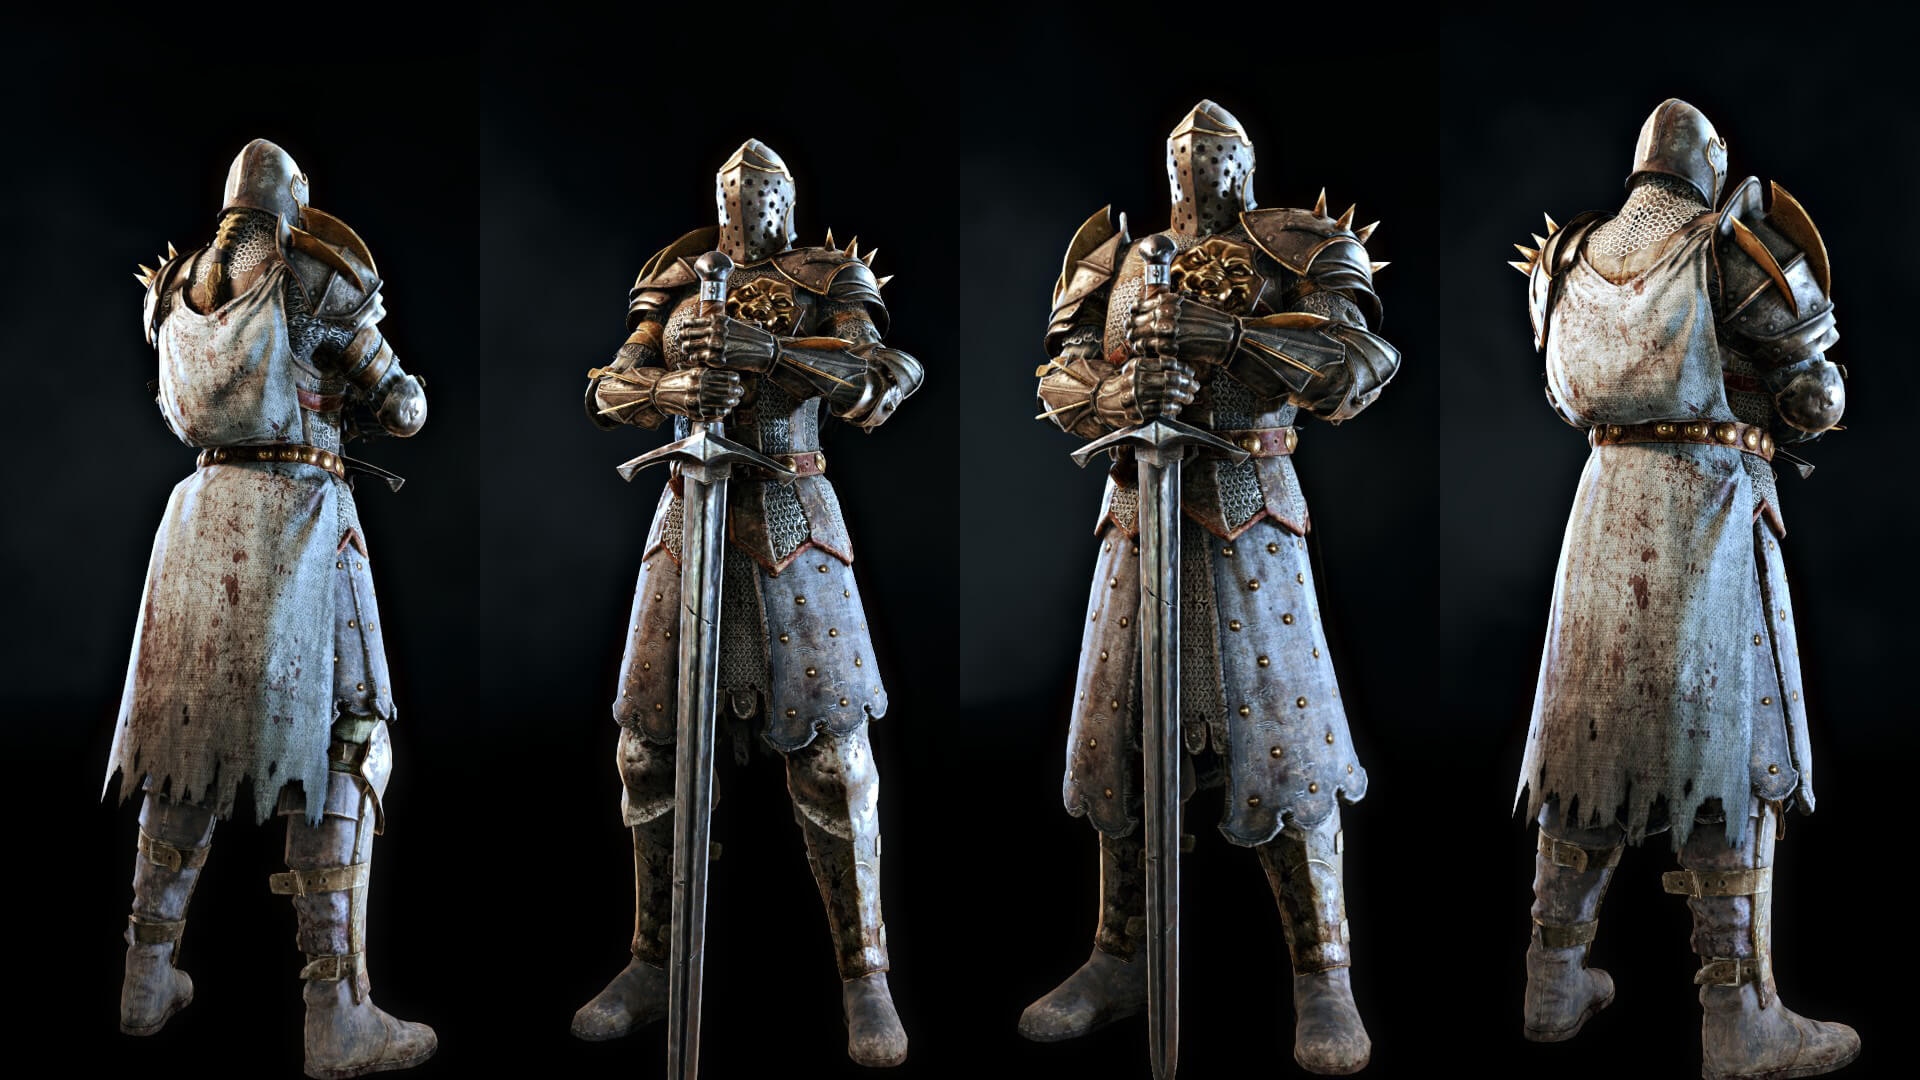 Different hammer types look great as well, in typical for honor fashion. 